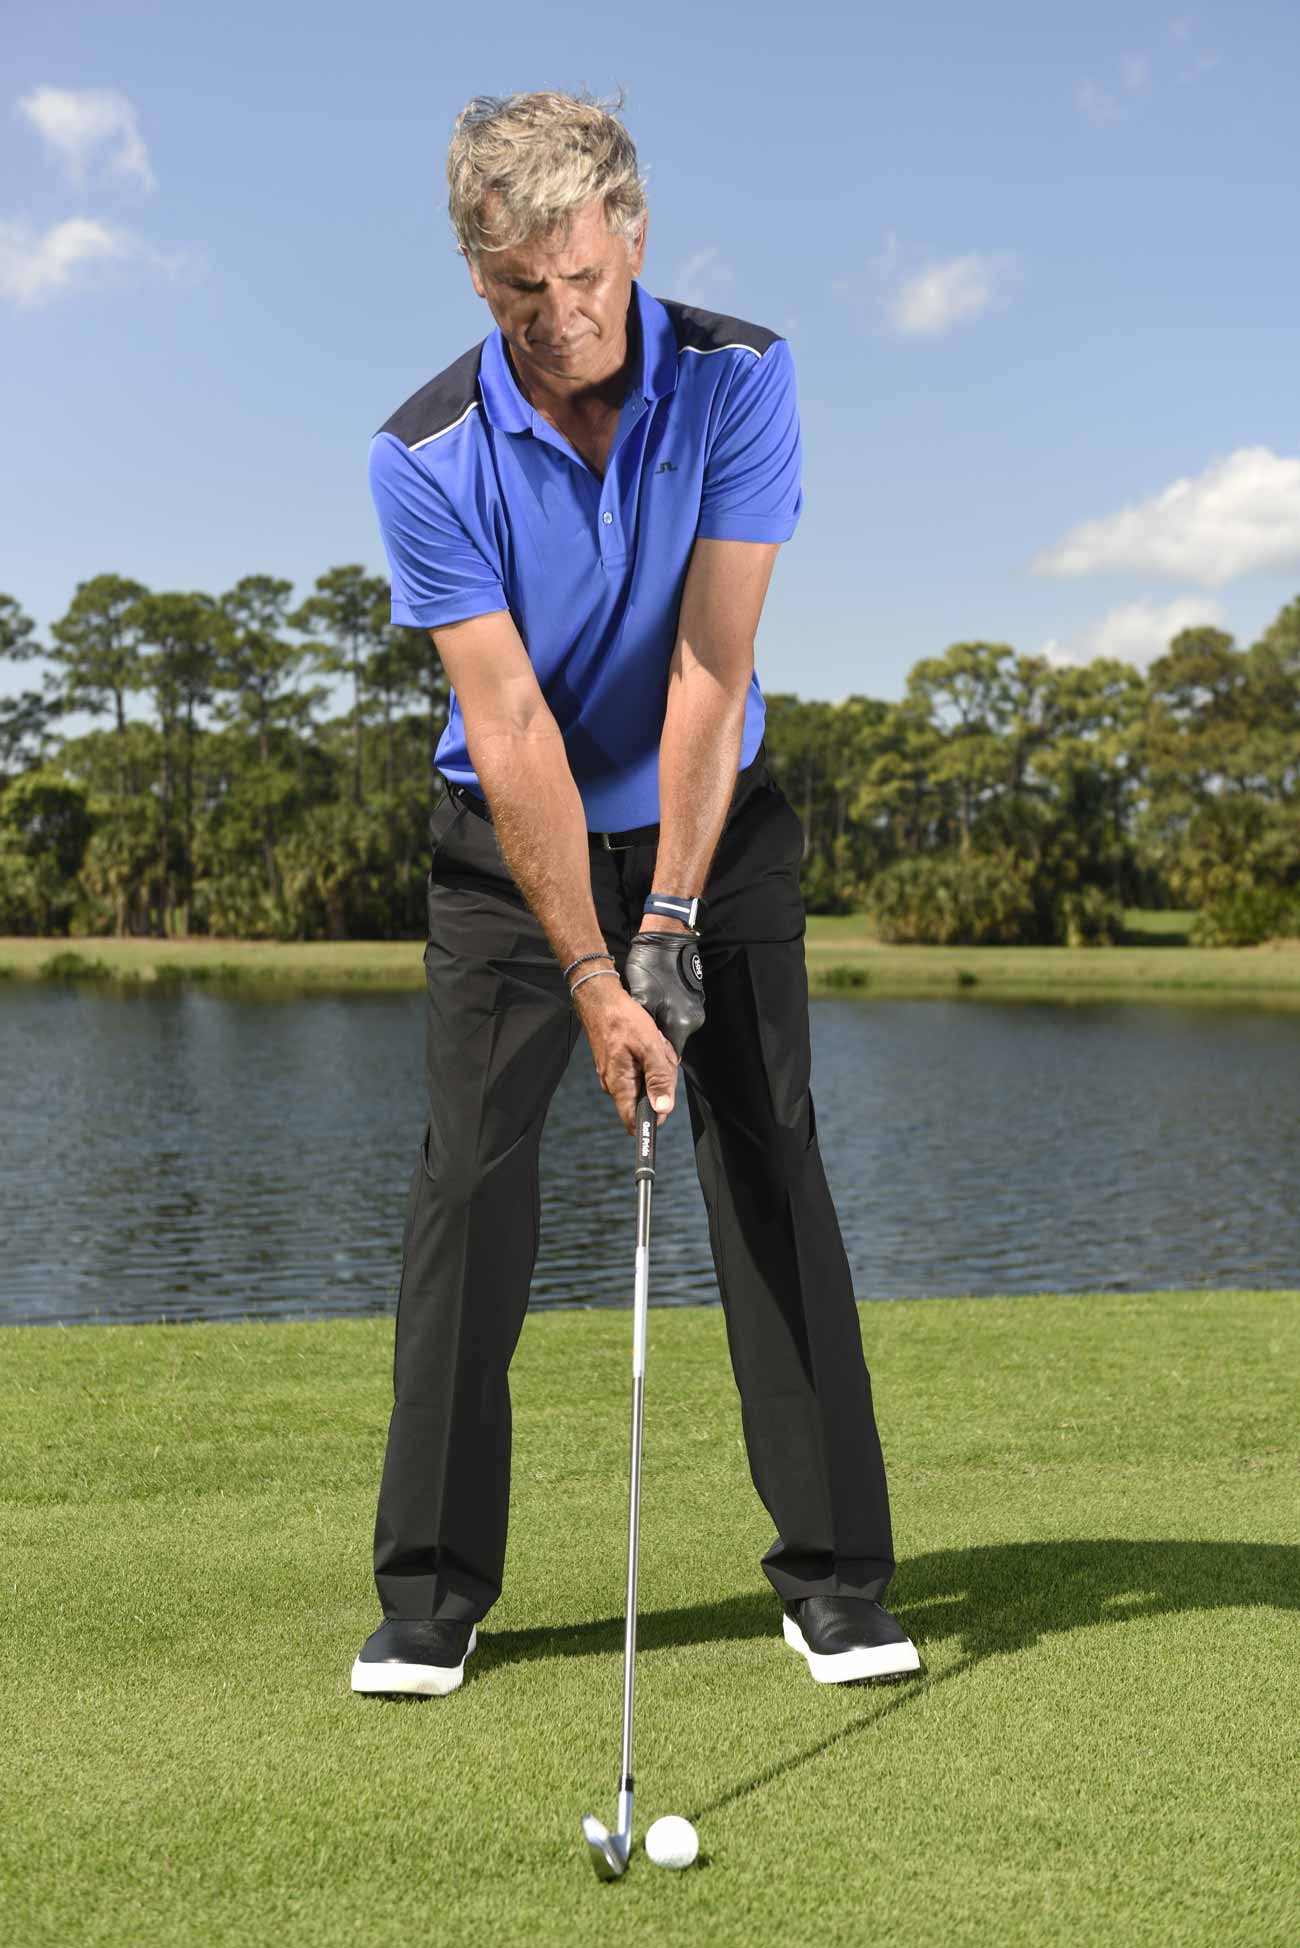 10 basics that will help beginner golfers play the game better